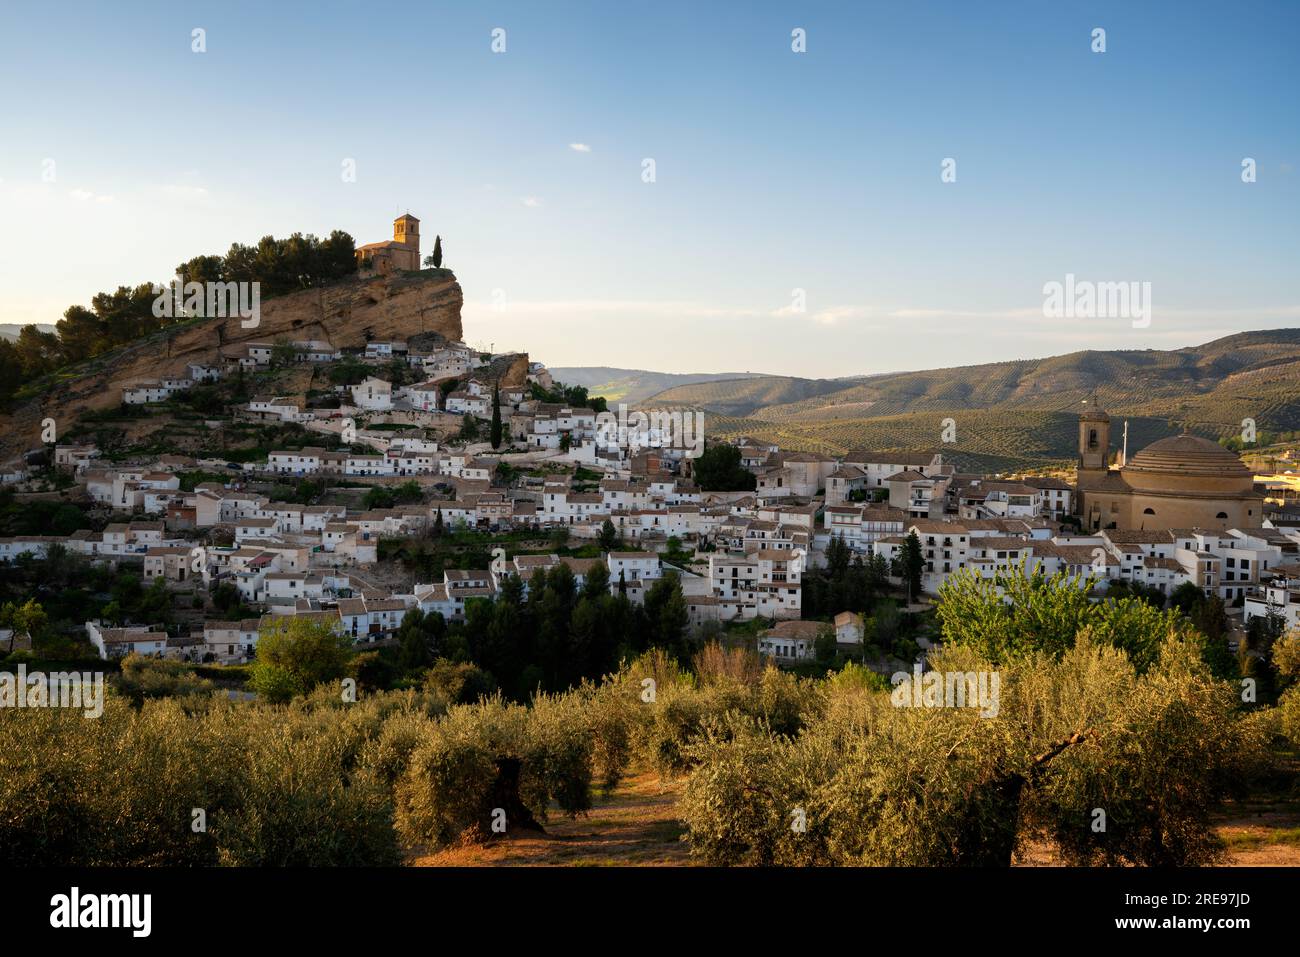 Picturesque view of aged town on hill with stone buildings and green trees under cloudless sky in n Montefrio village, Pueblos Blancos in Spain Stock Photo